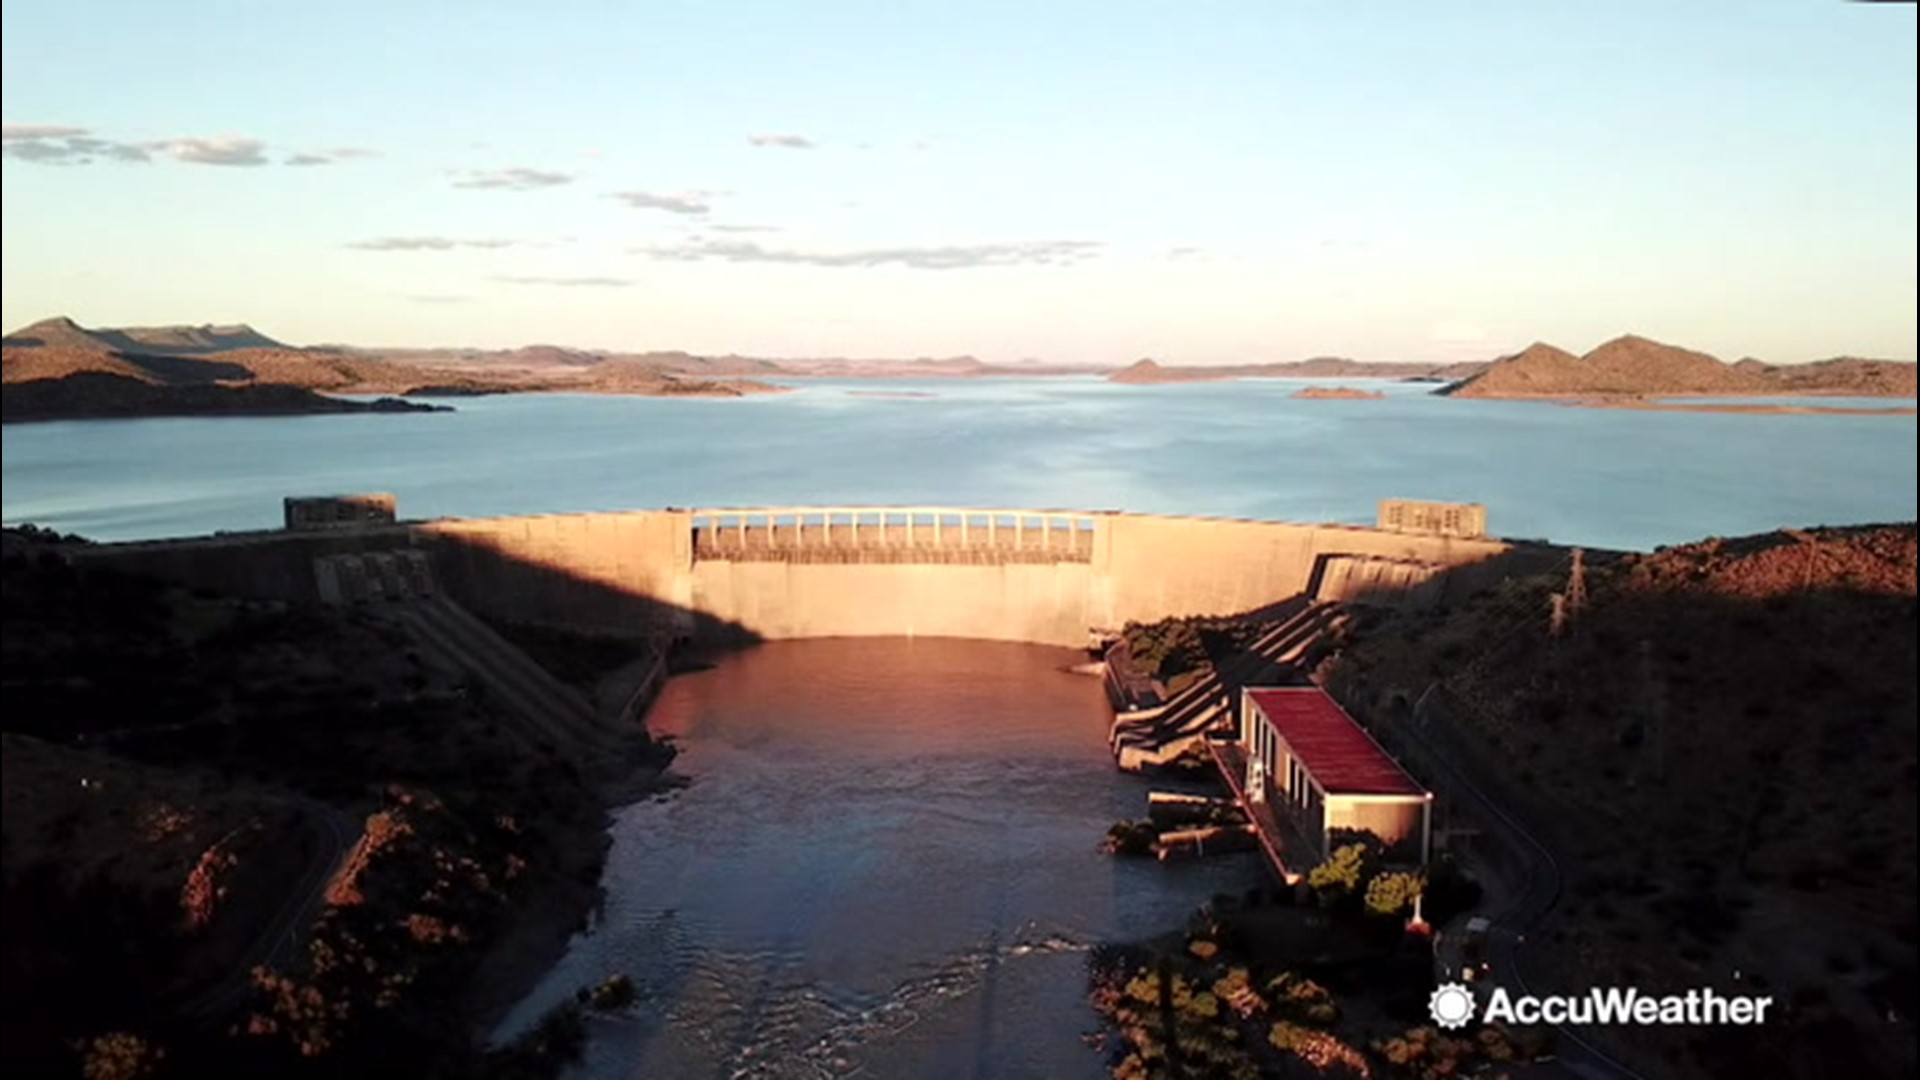 These structures share a similar function, to help prevent flooding in the region they're built in.  But they also serve different purposes.  What are the differences between dams, dikes and levees?  Let's find out